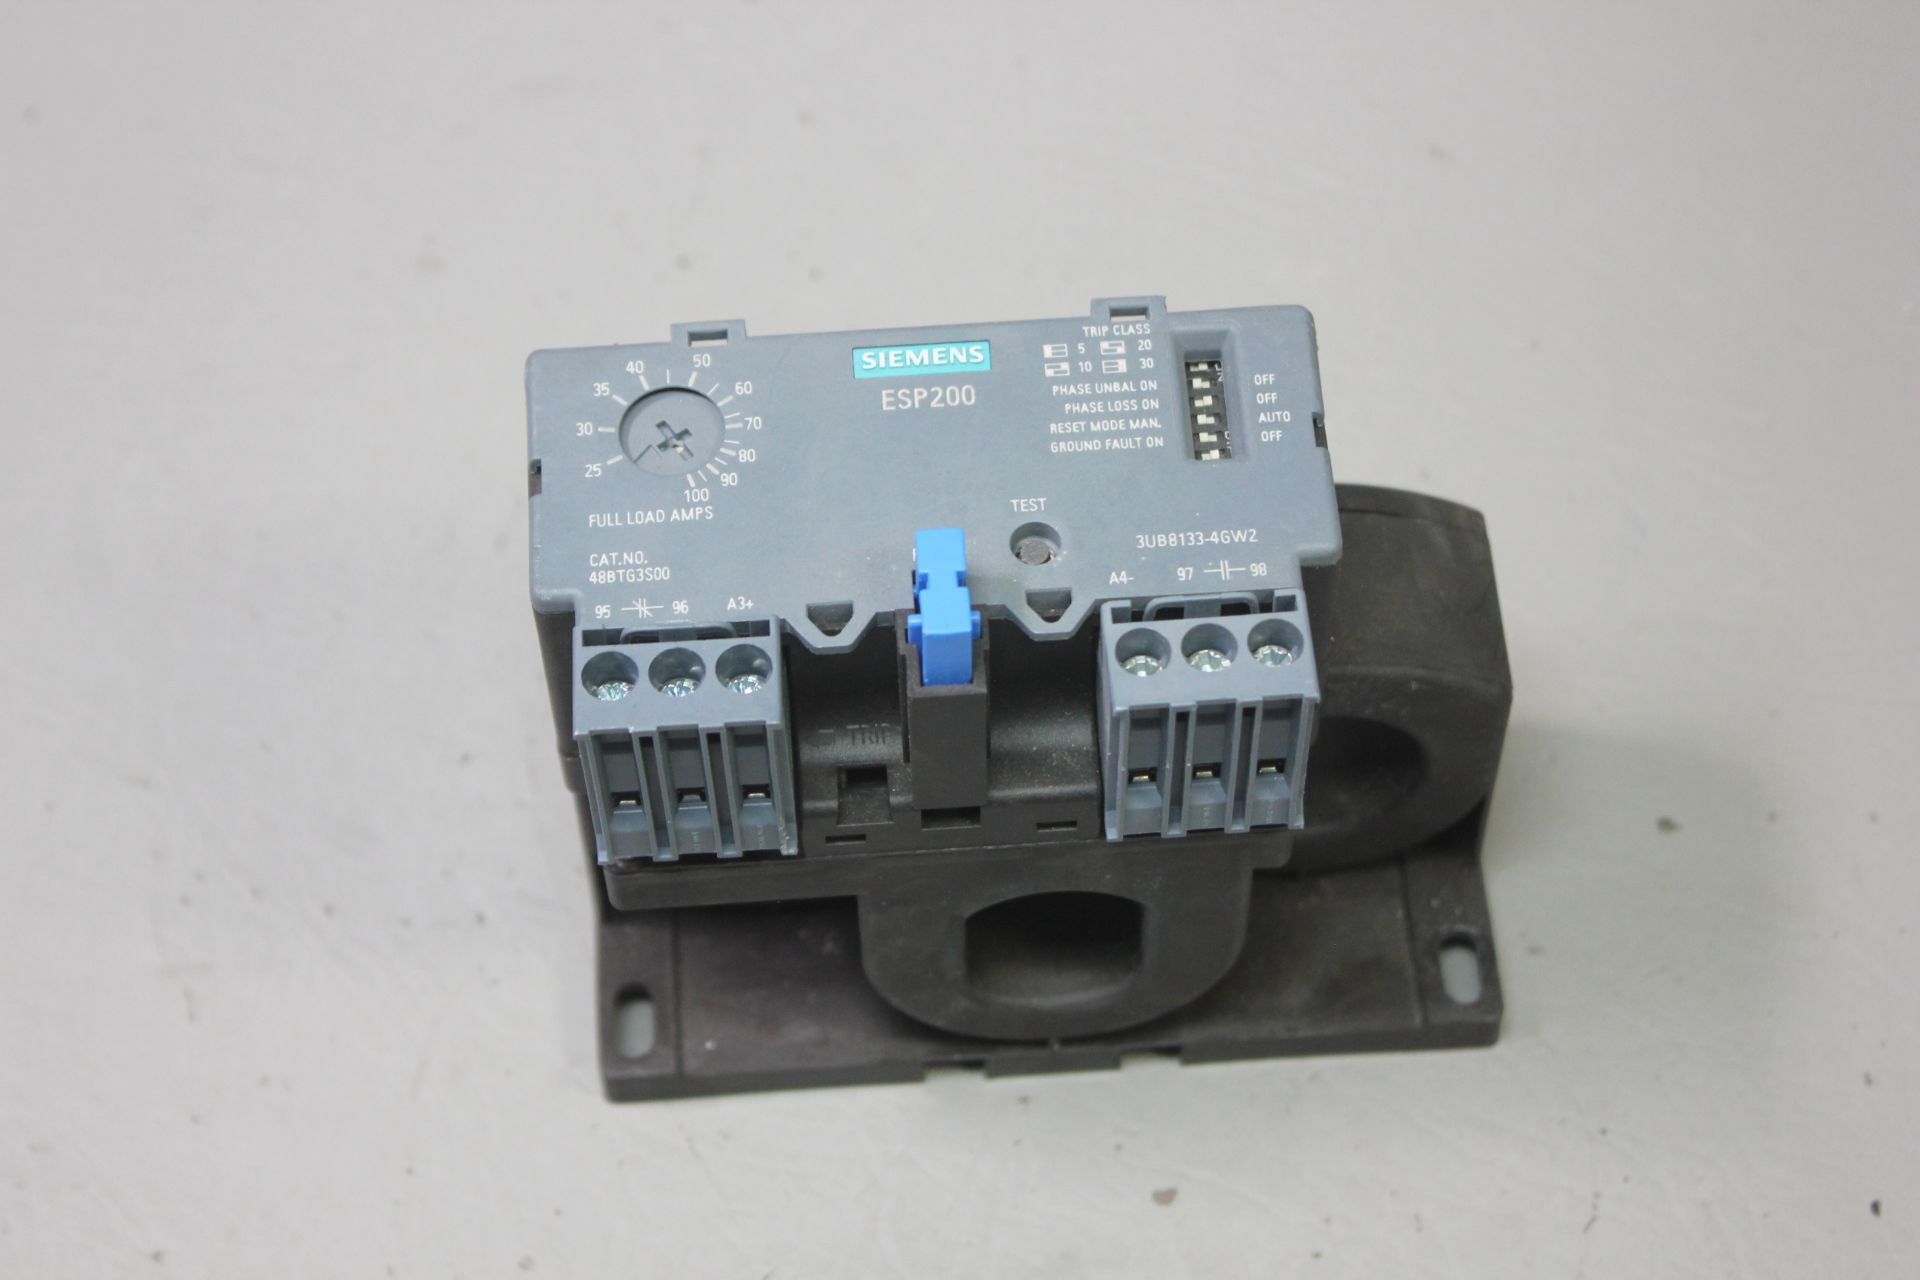 SIEMENS SOLID STATE OVERLOAD RELAY